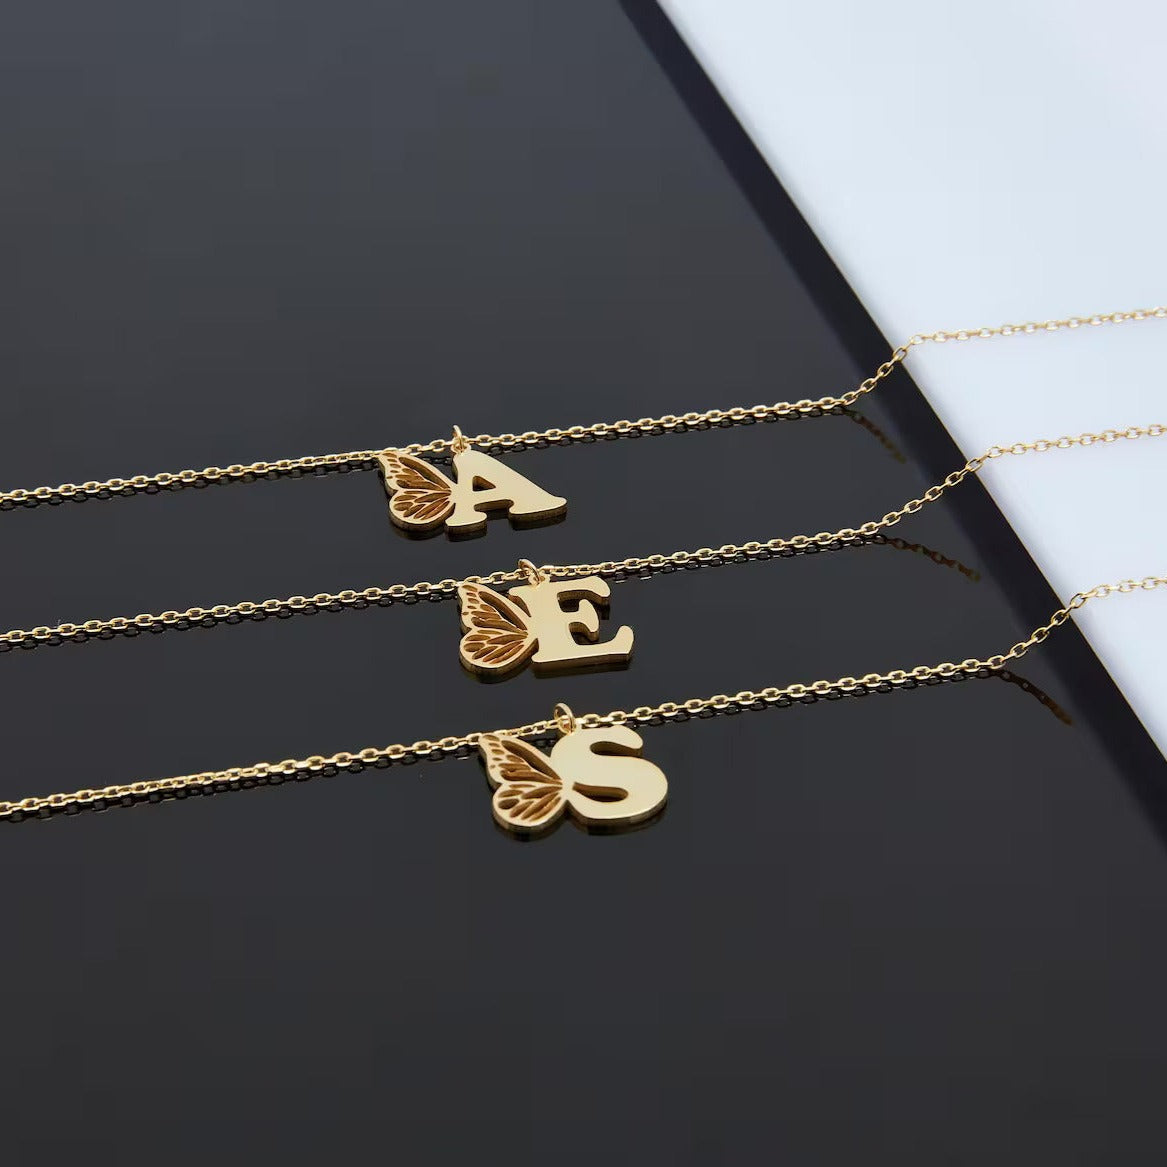 This exquisite 18 carat gold birthstone necklace is a beautiful symbol of love. It includes a dainty gemstone and a personalized letter pendant, making it a heartfelt gift for your beloved.